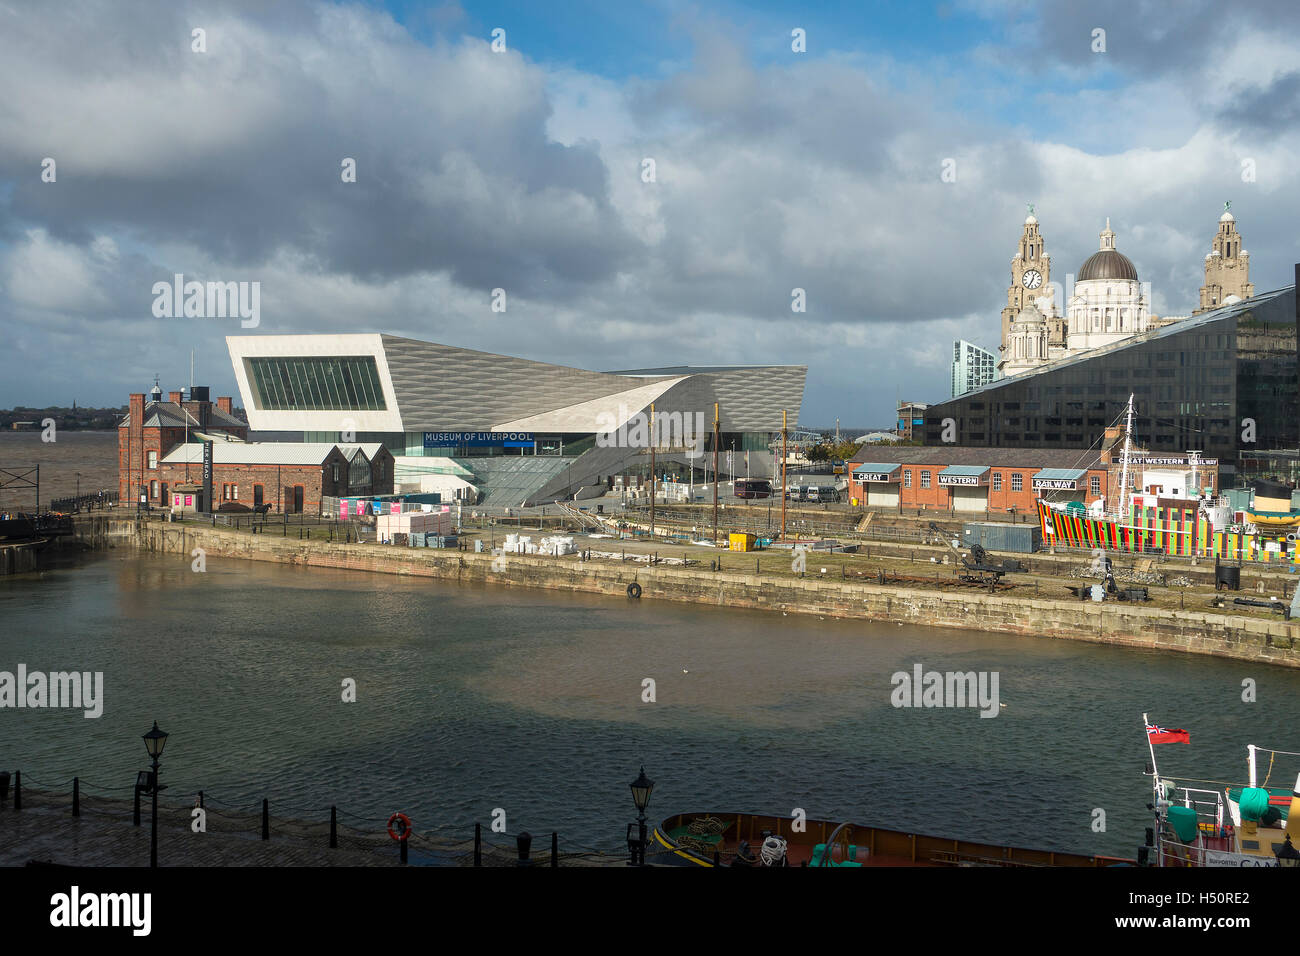 The Modern Museum of Liverpool at Pier Head Waterfront Merseyside England United Kingdom UK Stock Photo